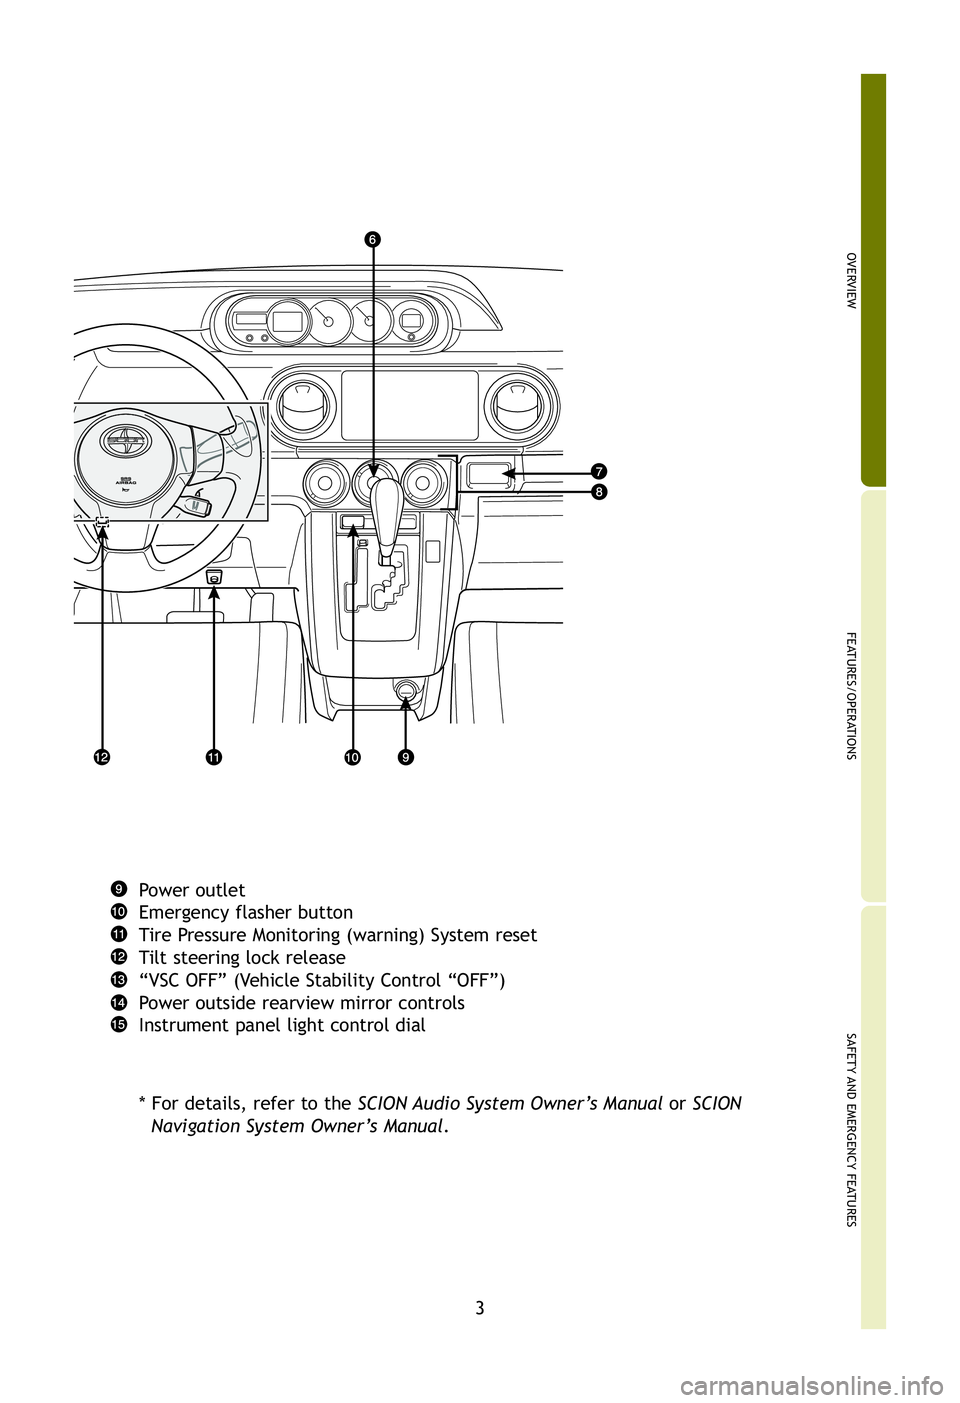 TOYOTA xB 2012  Owners Manual (in English) OVERVIEW
FEATURES/OPERATIONS
SAFETY AND EMERGENCY FEATURES
3
Power outlet
Emergency flasher button
Tire Pressure Monitoring (warning) System reset
Tilt steering lock release
“VSC OFF” (Vehicle Sta